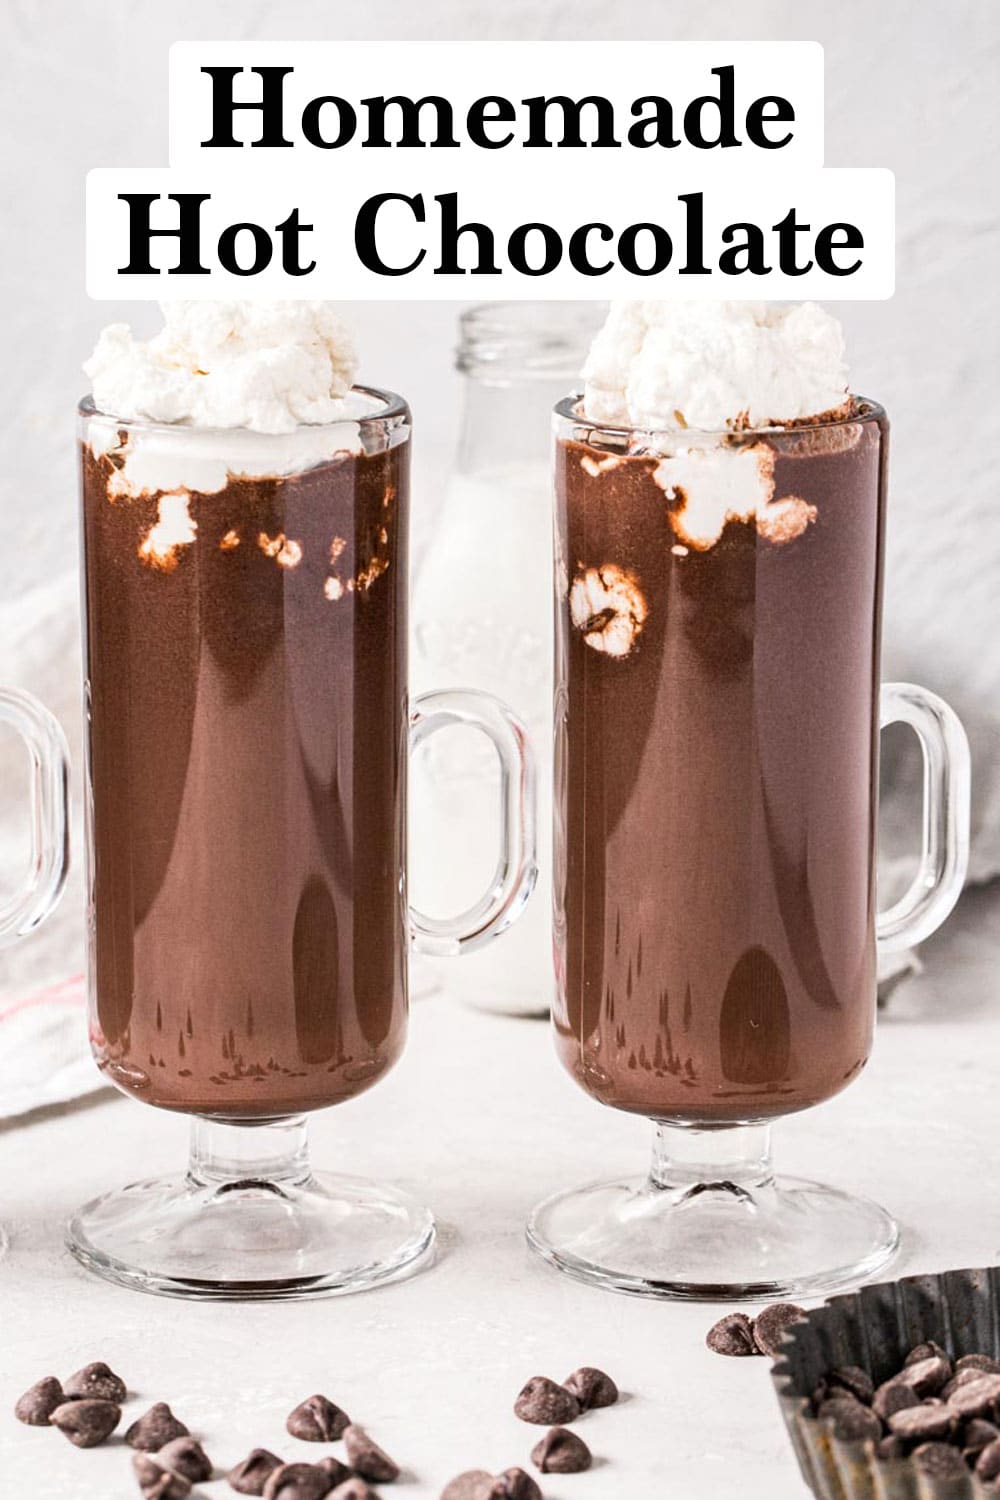 Homemade hot chocolate topped with homemade whipped cream in tall glasses with handles.